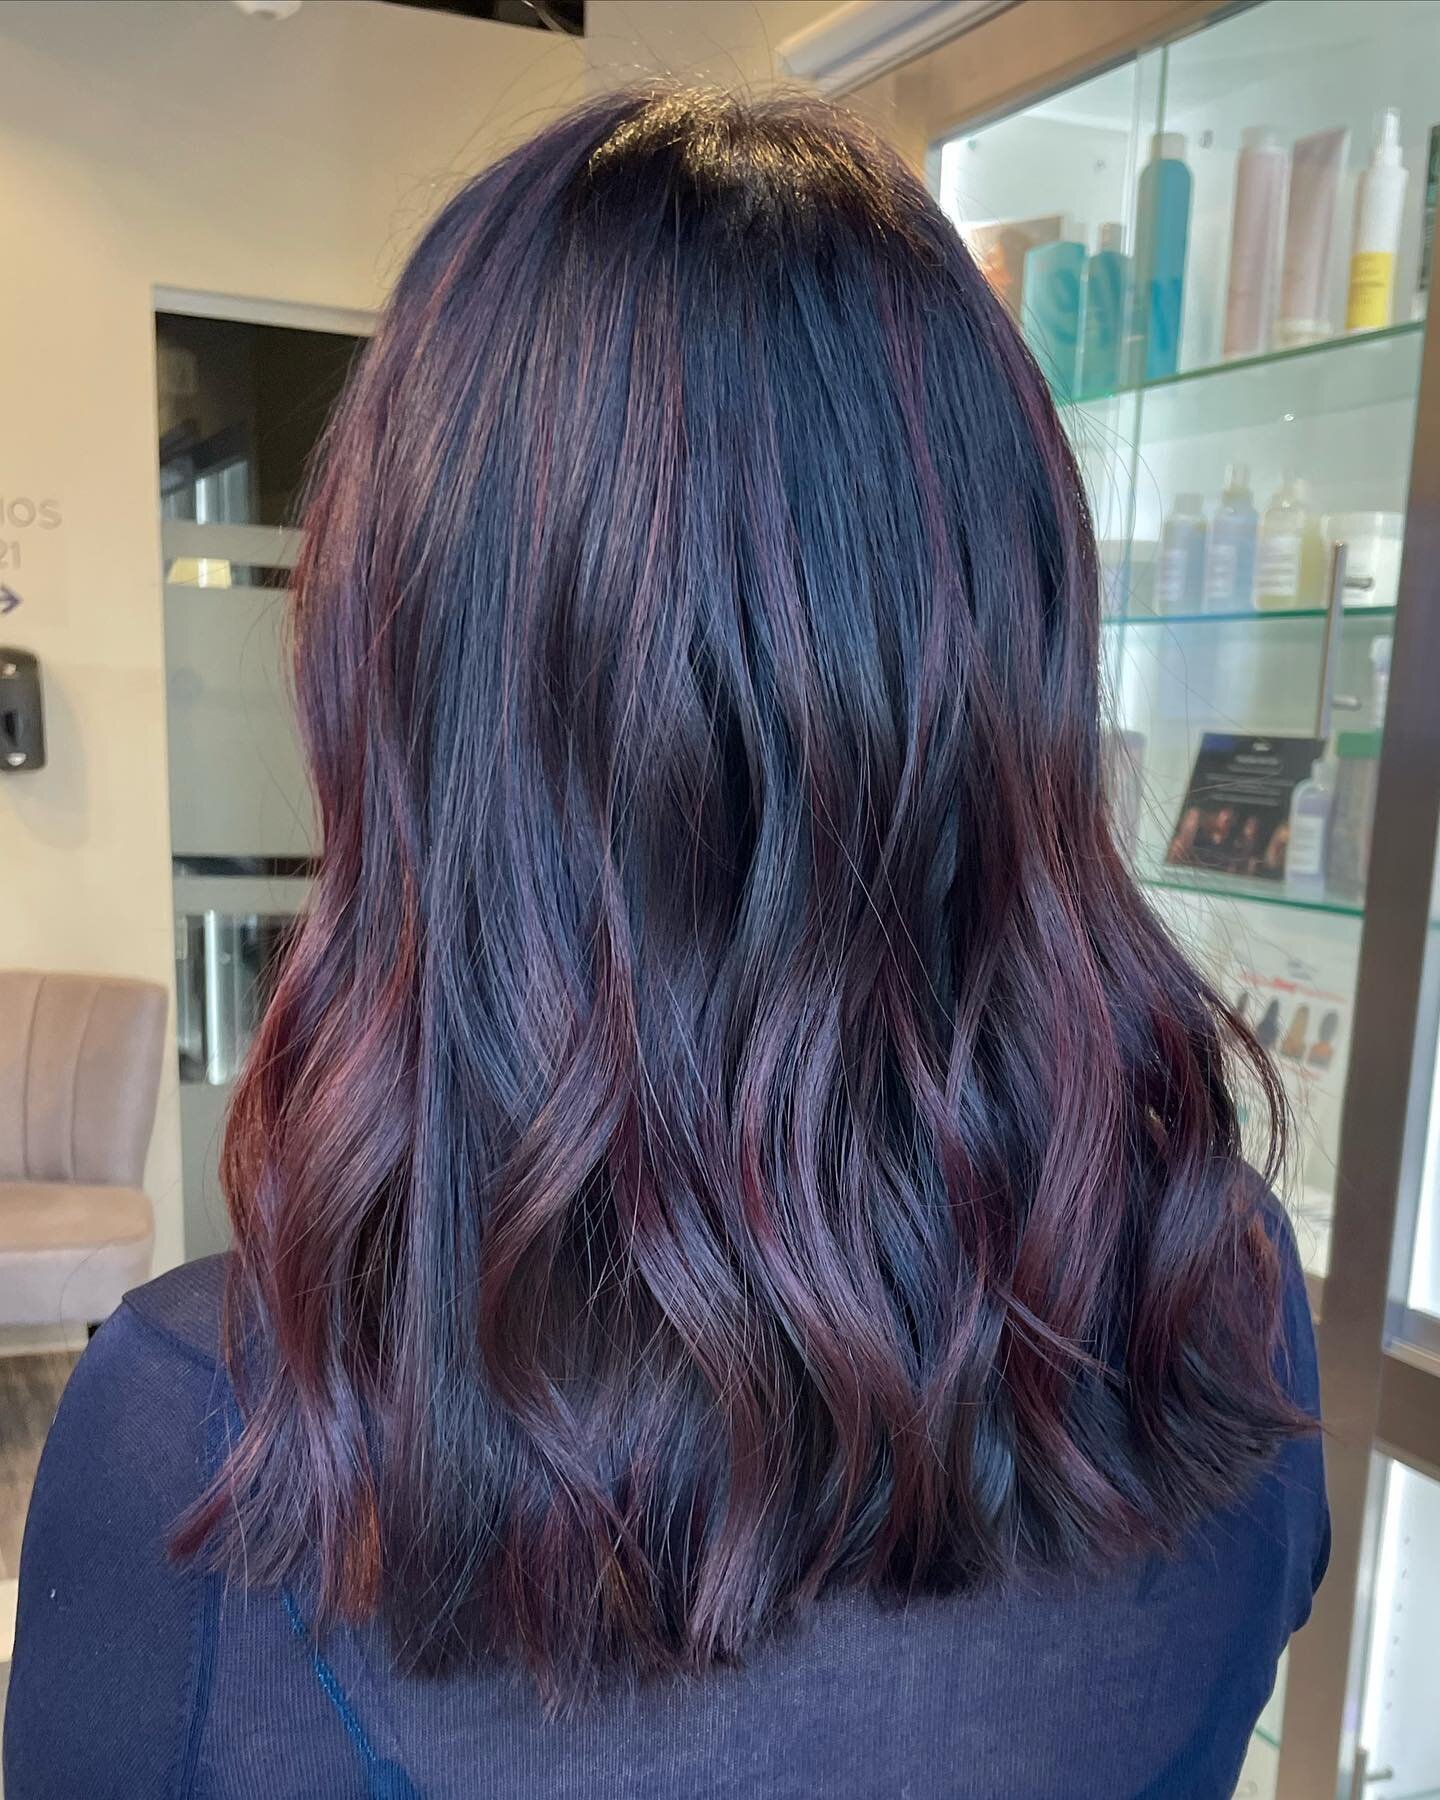 Burgundy Merlot 🍷

⚡️Partial balayage 
⚡️glossed with 3vv 5rrv 6nv 

Check your email for my holiday promo!! If it&rsquo;s not in your inbox, check your spam. If it&rsquo;s not in your spam, DM me ☺️🎄